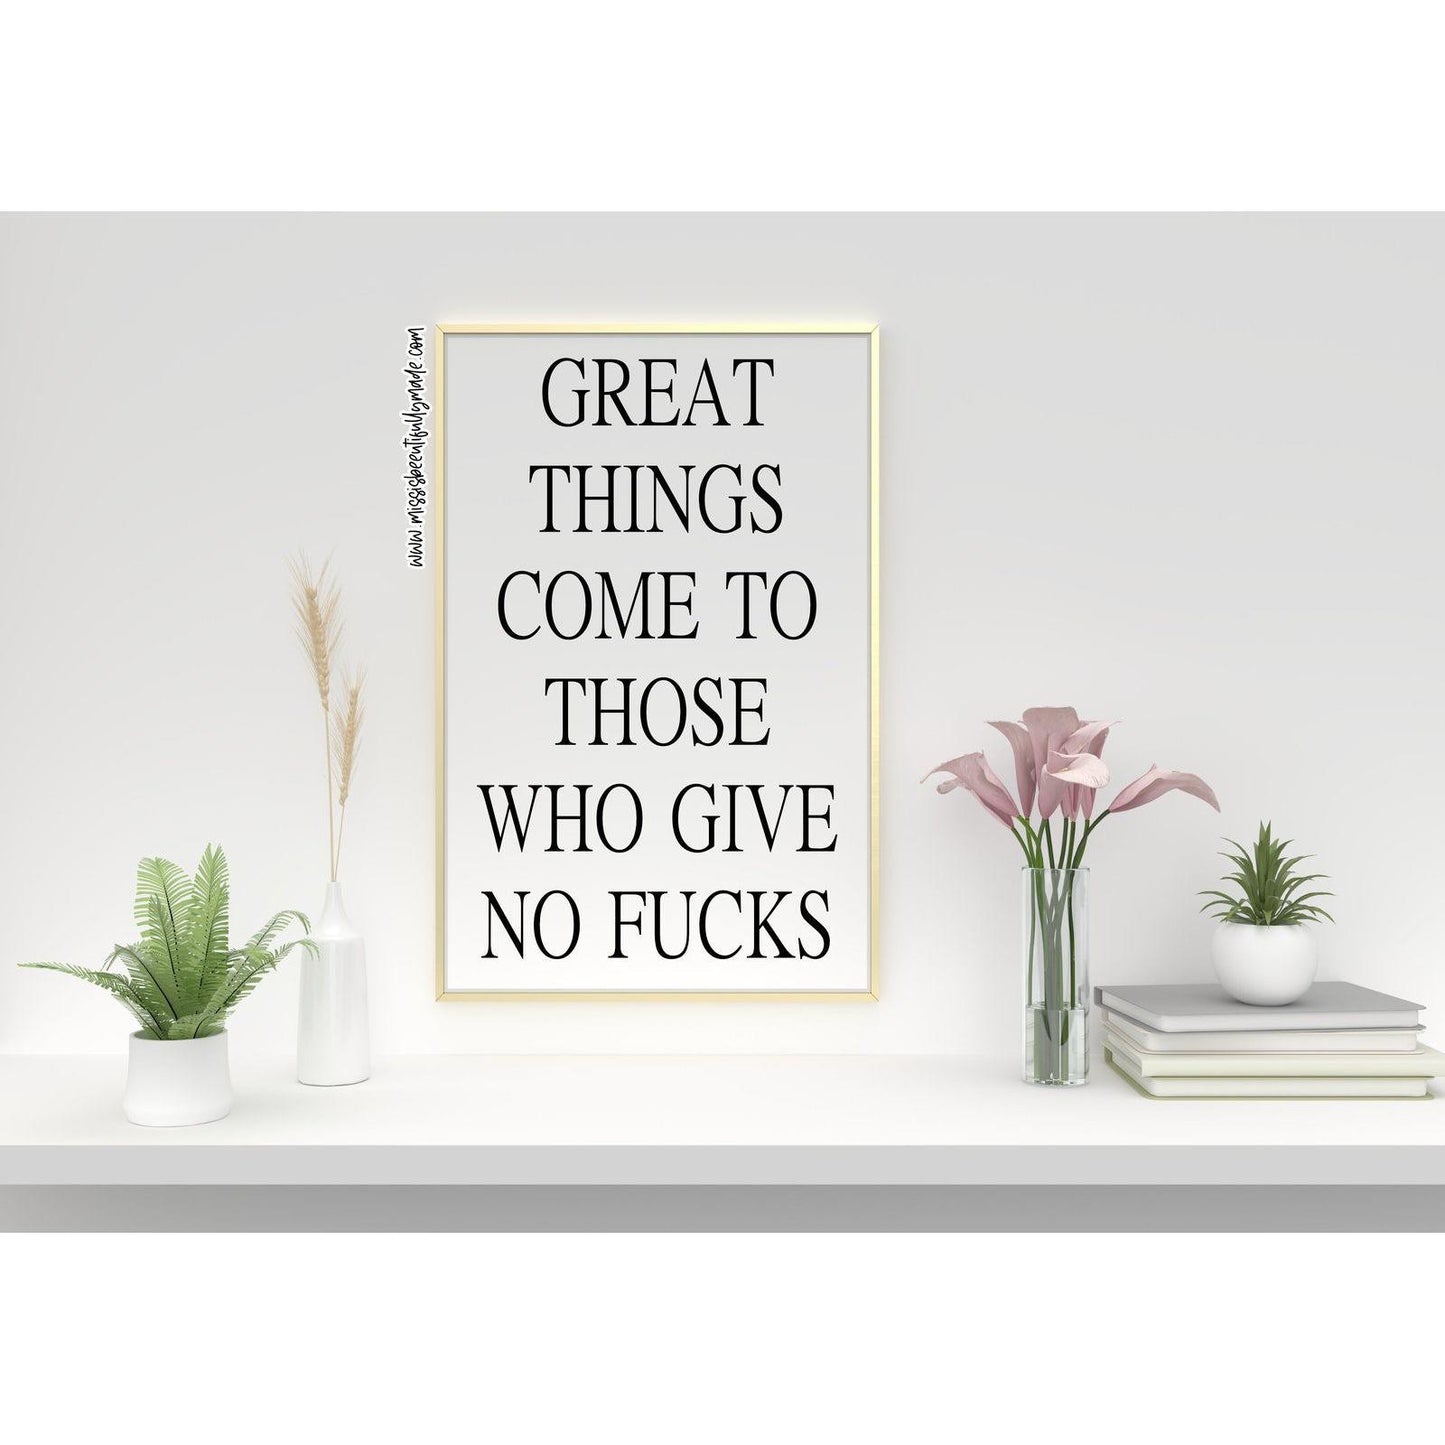 Digital Print - Great things come to those who give no fucks